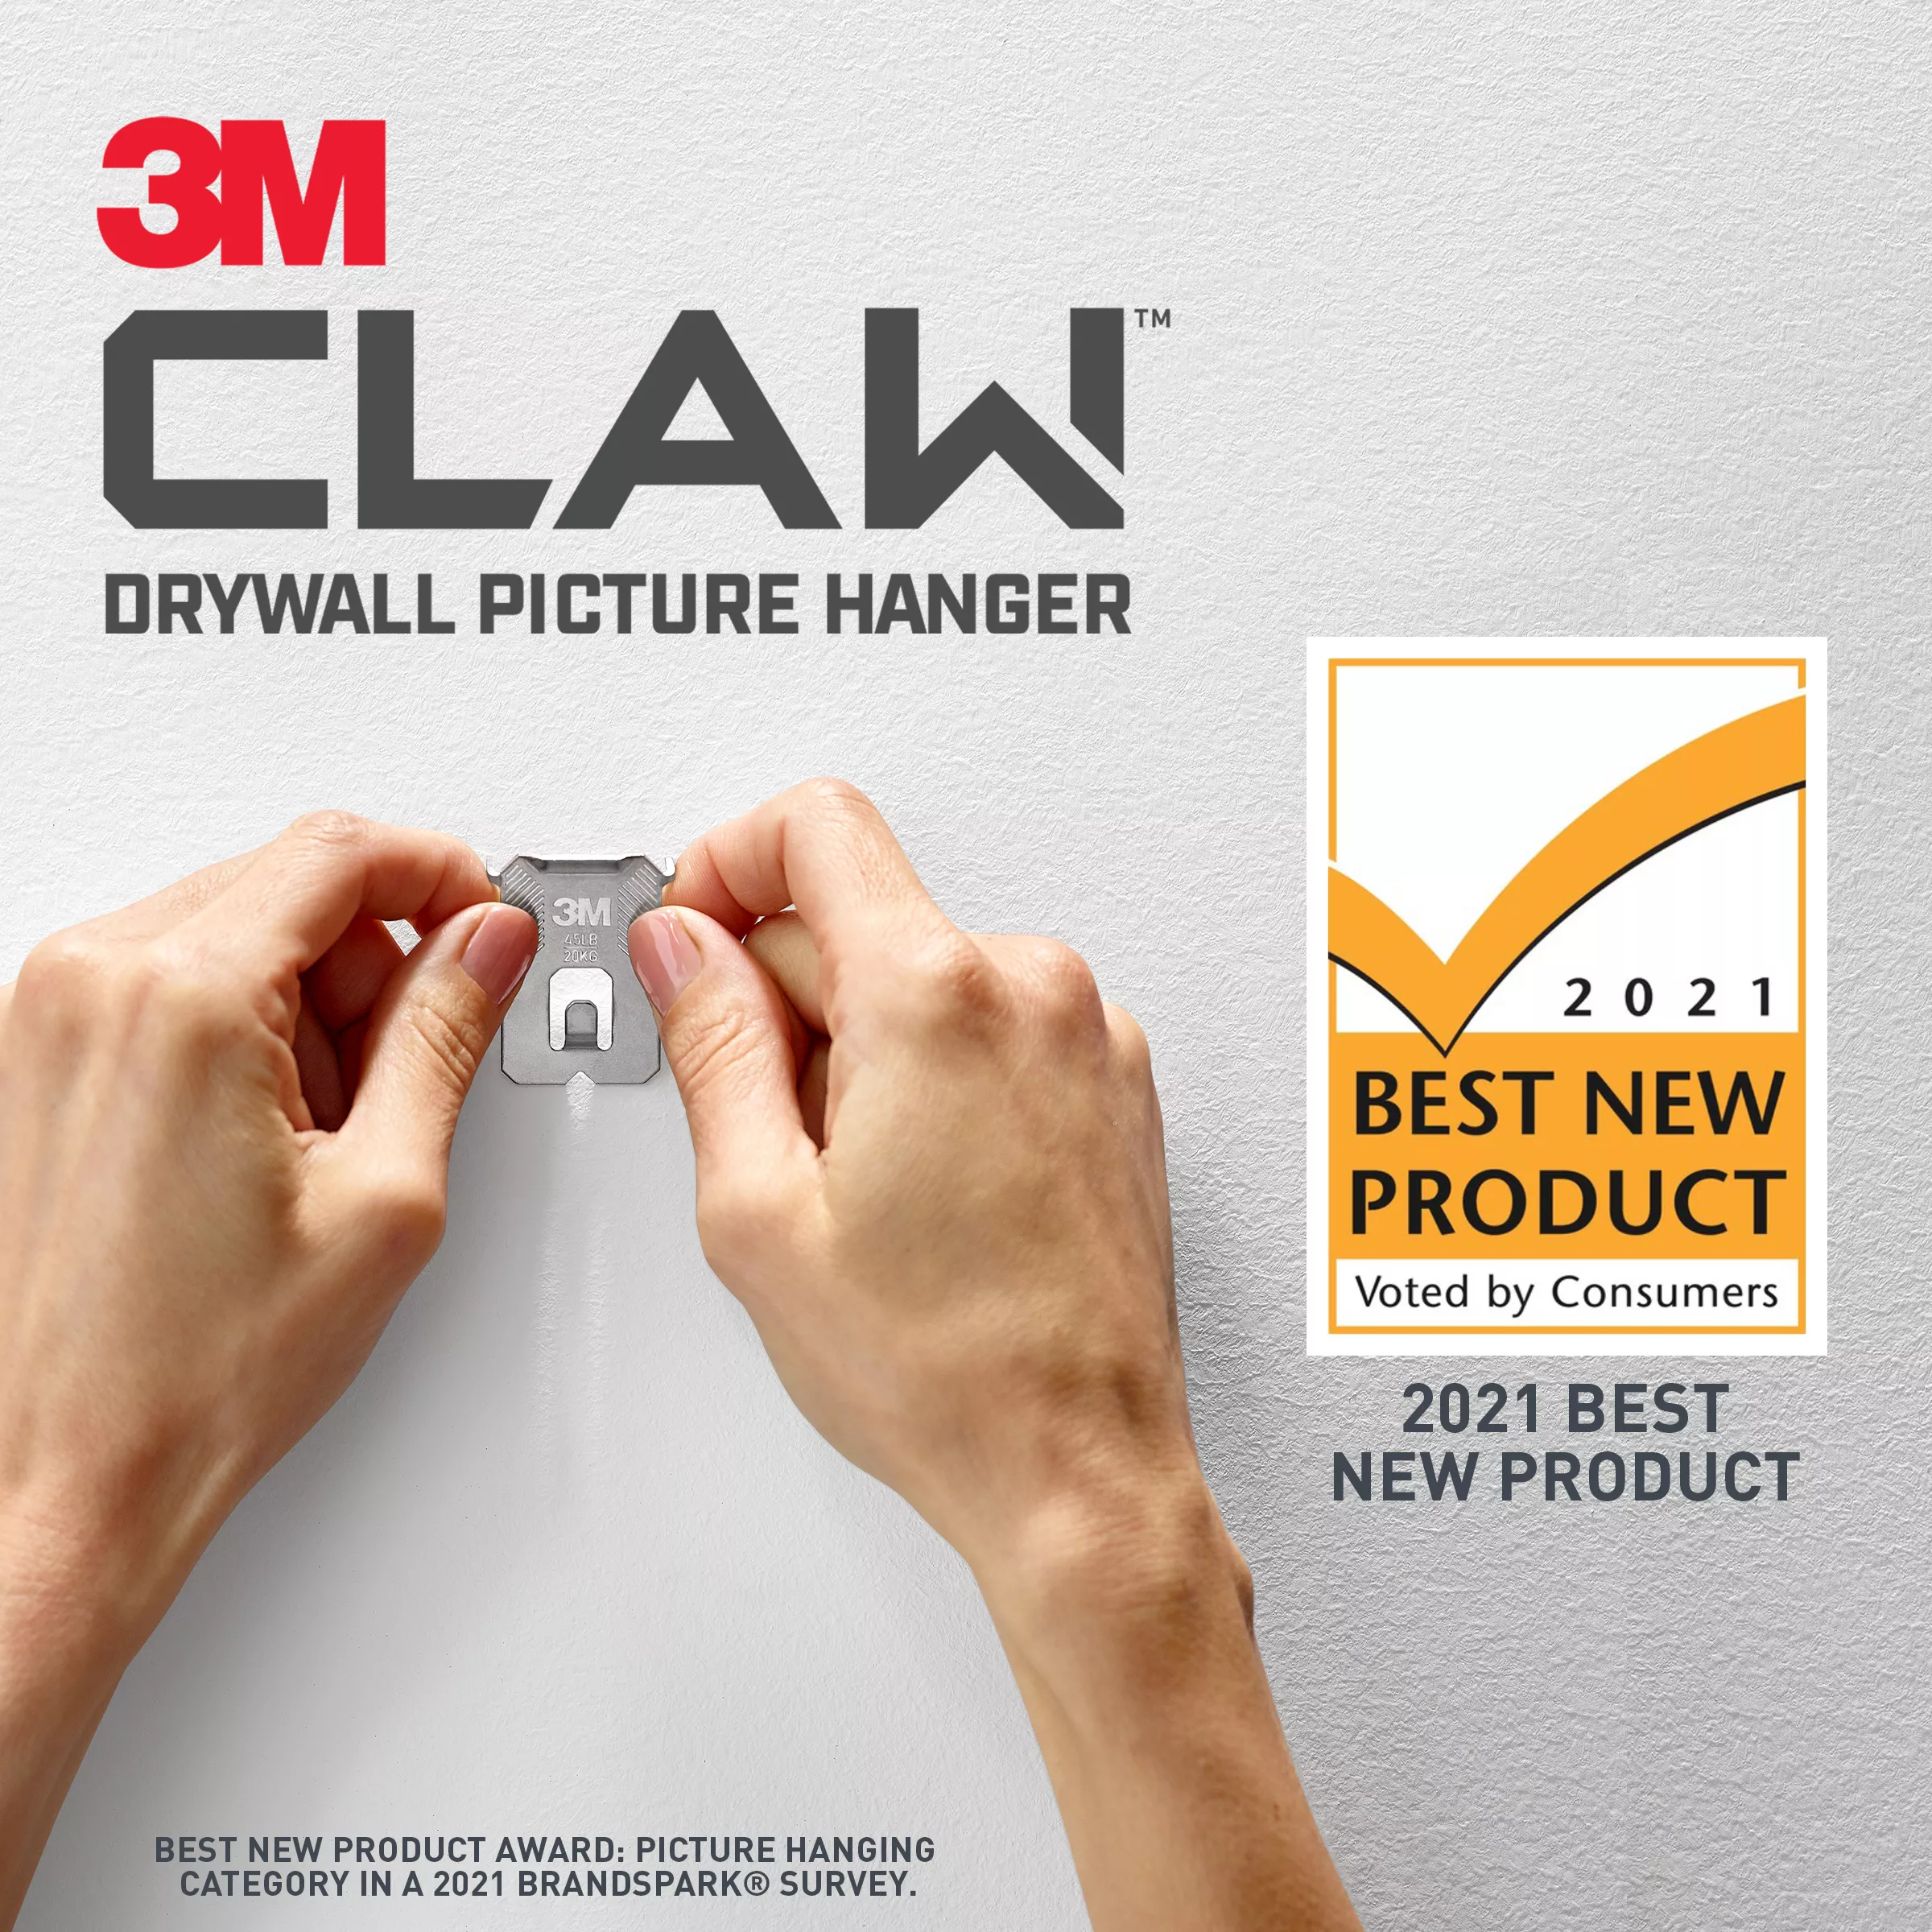 SKU 7100233242 | 3M™ CLAW™ Drywall Picture Hanger 45 lb with Temporary Spot Marker 3PH45M-1ES